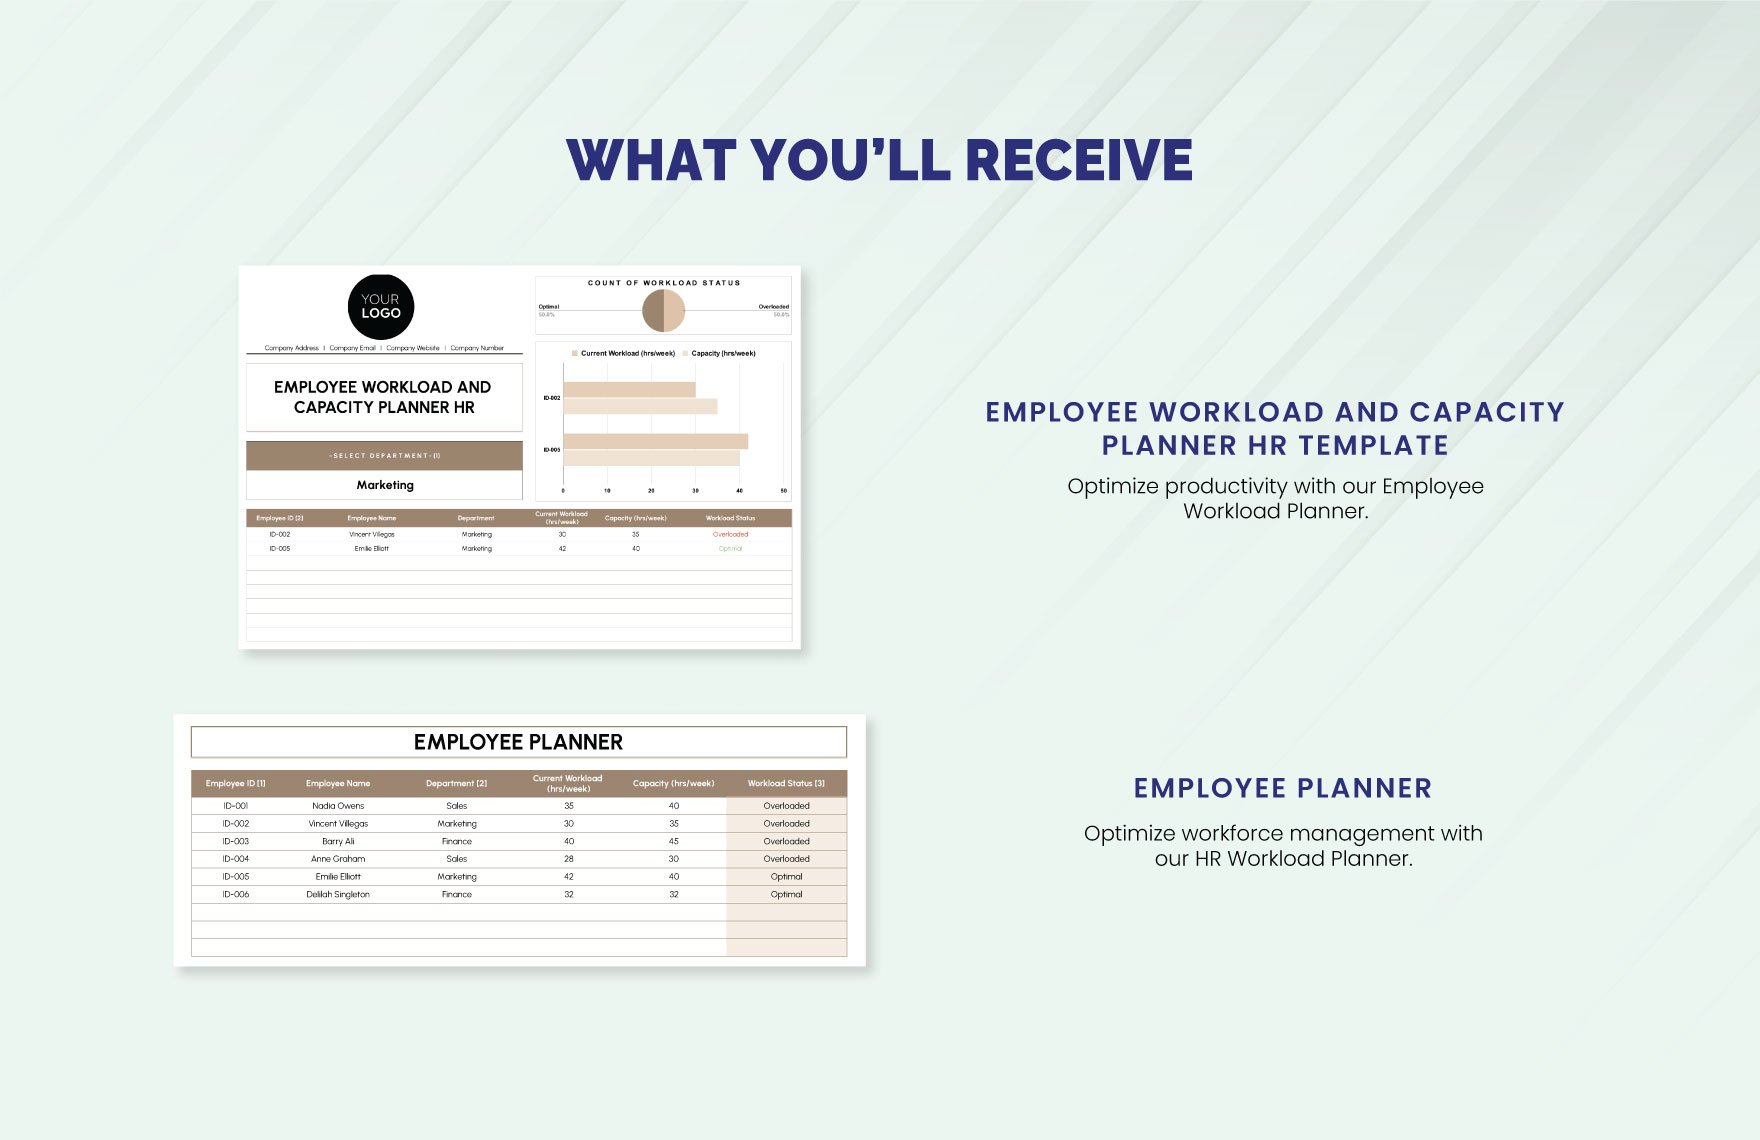 Employee Workload and Capacity Planner HR Template